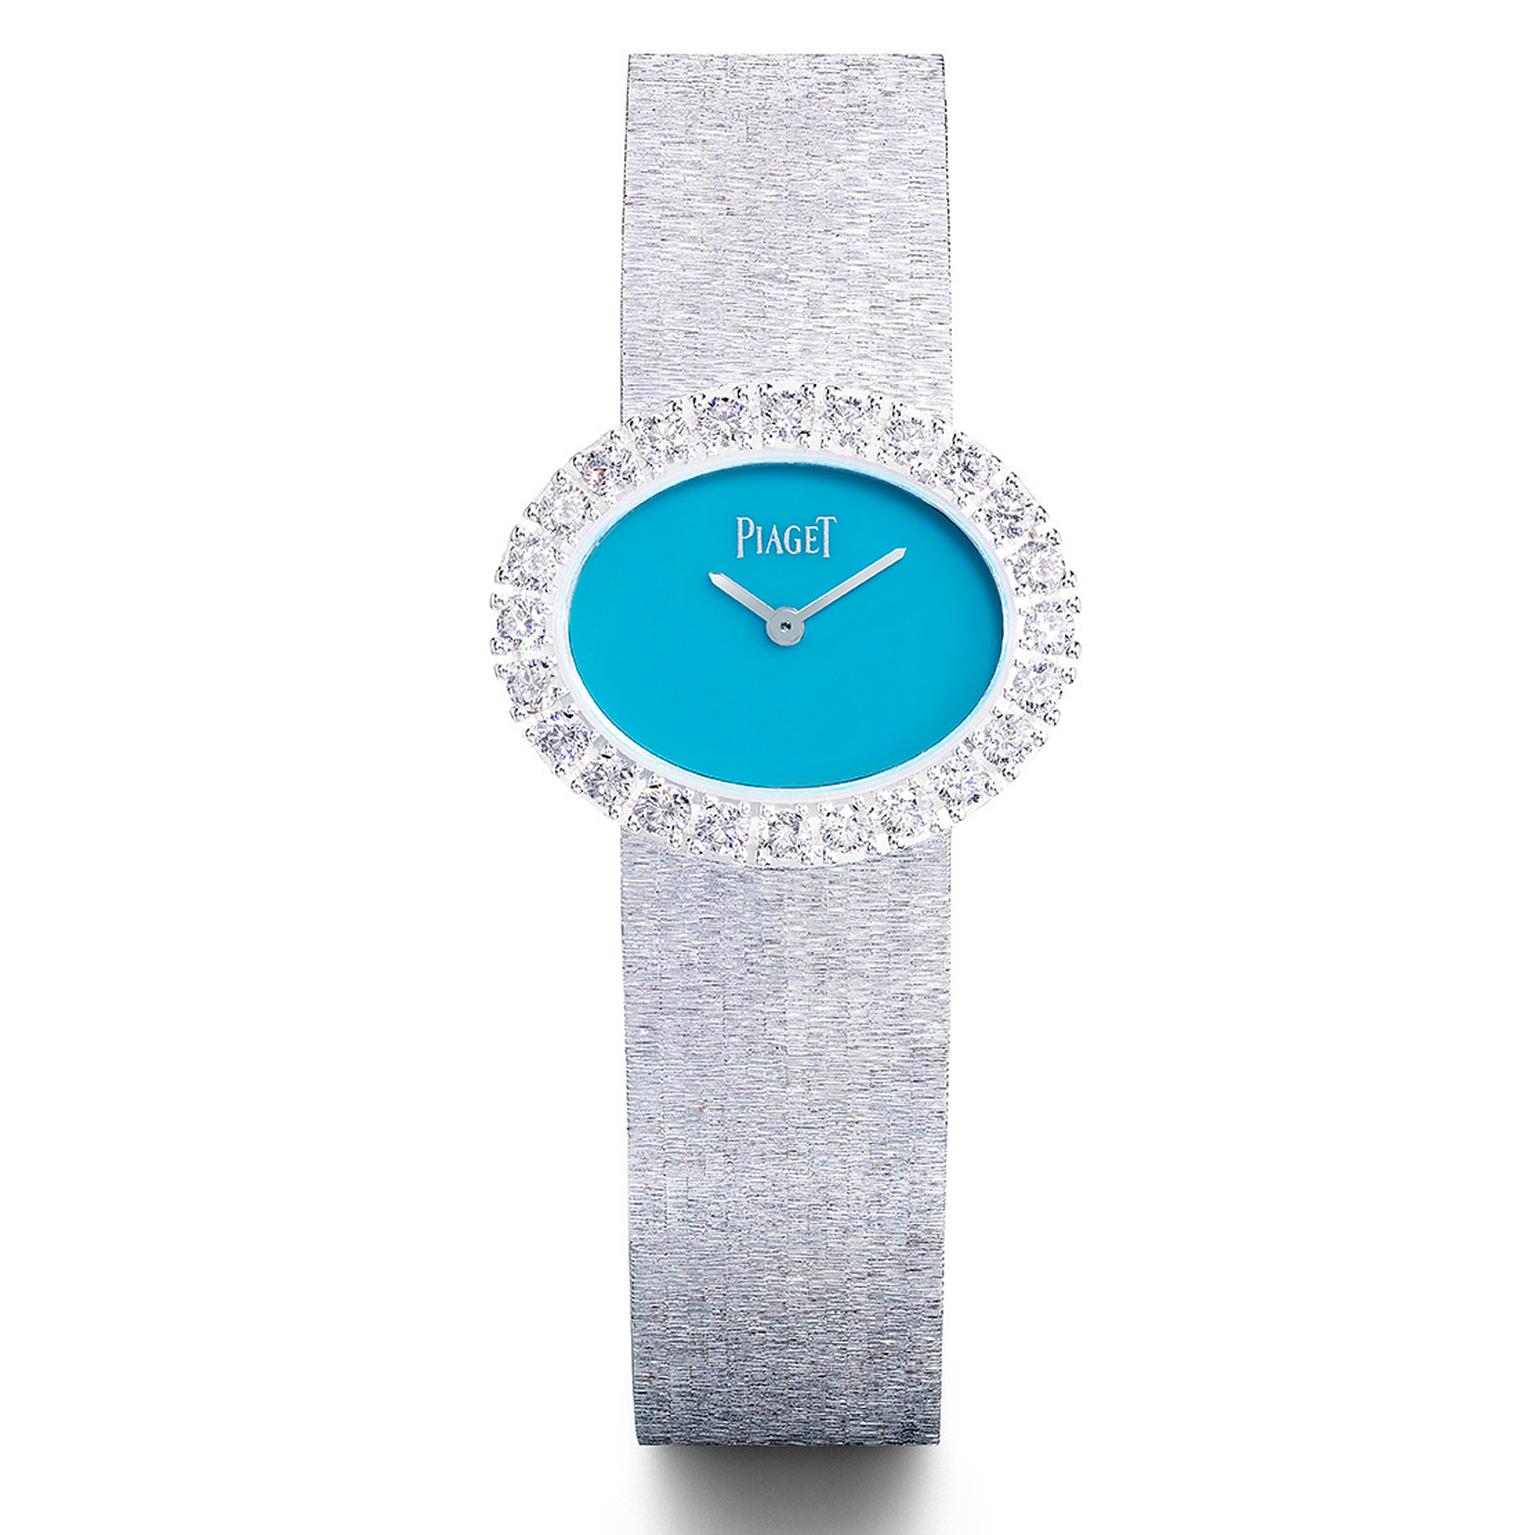 Piaget white gold watch with Turquoise dial